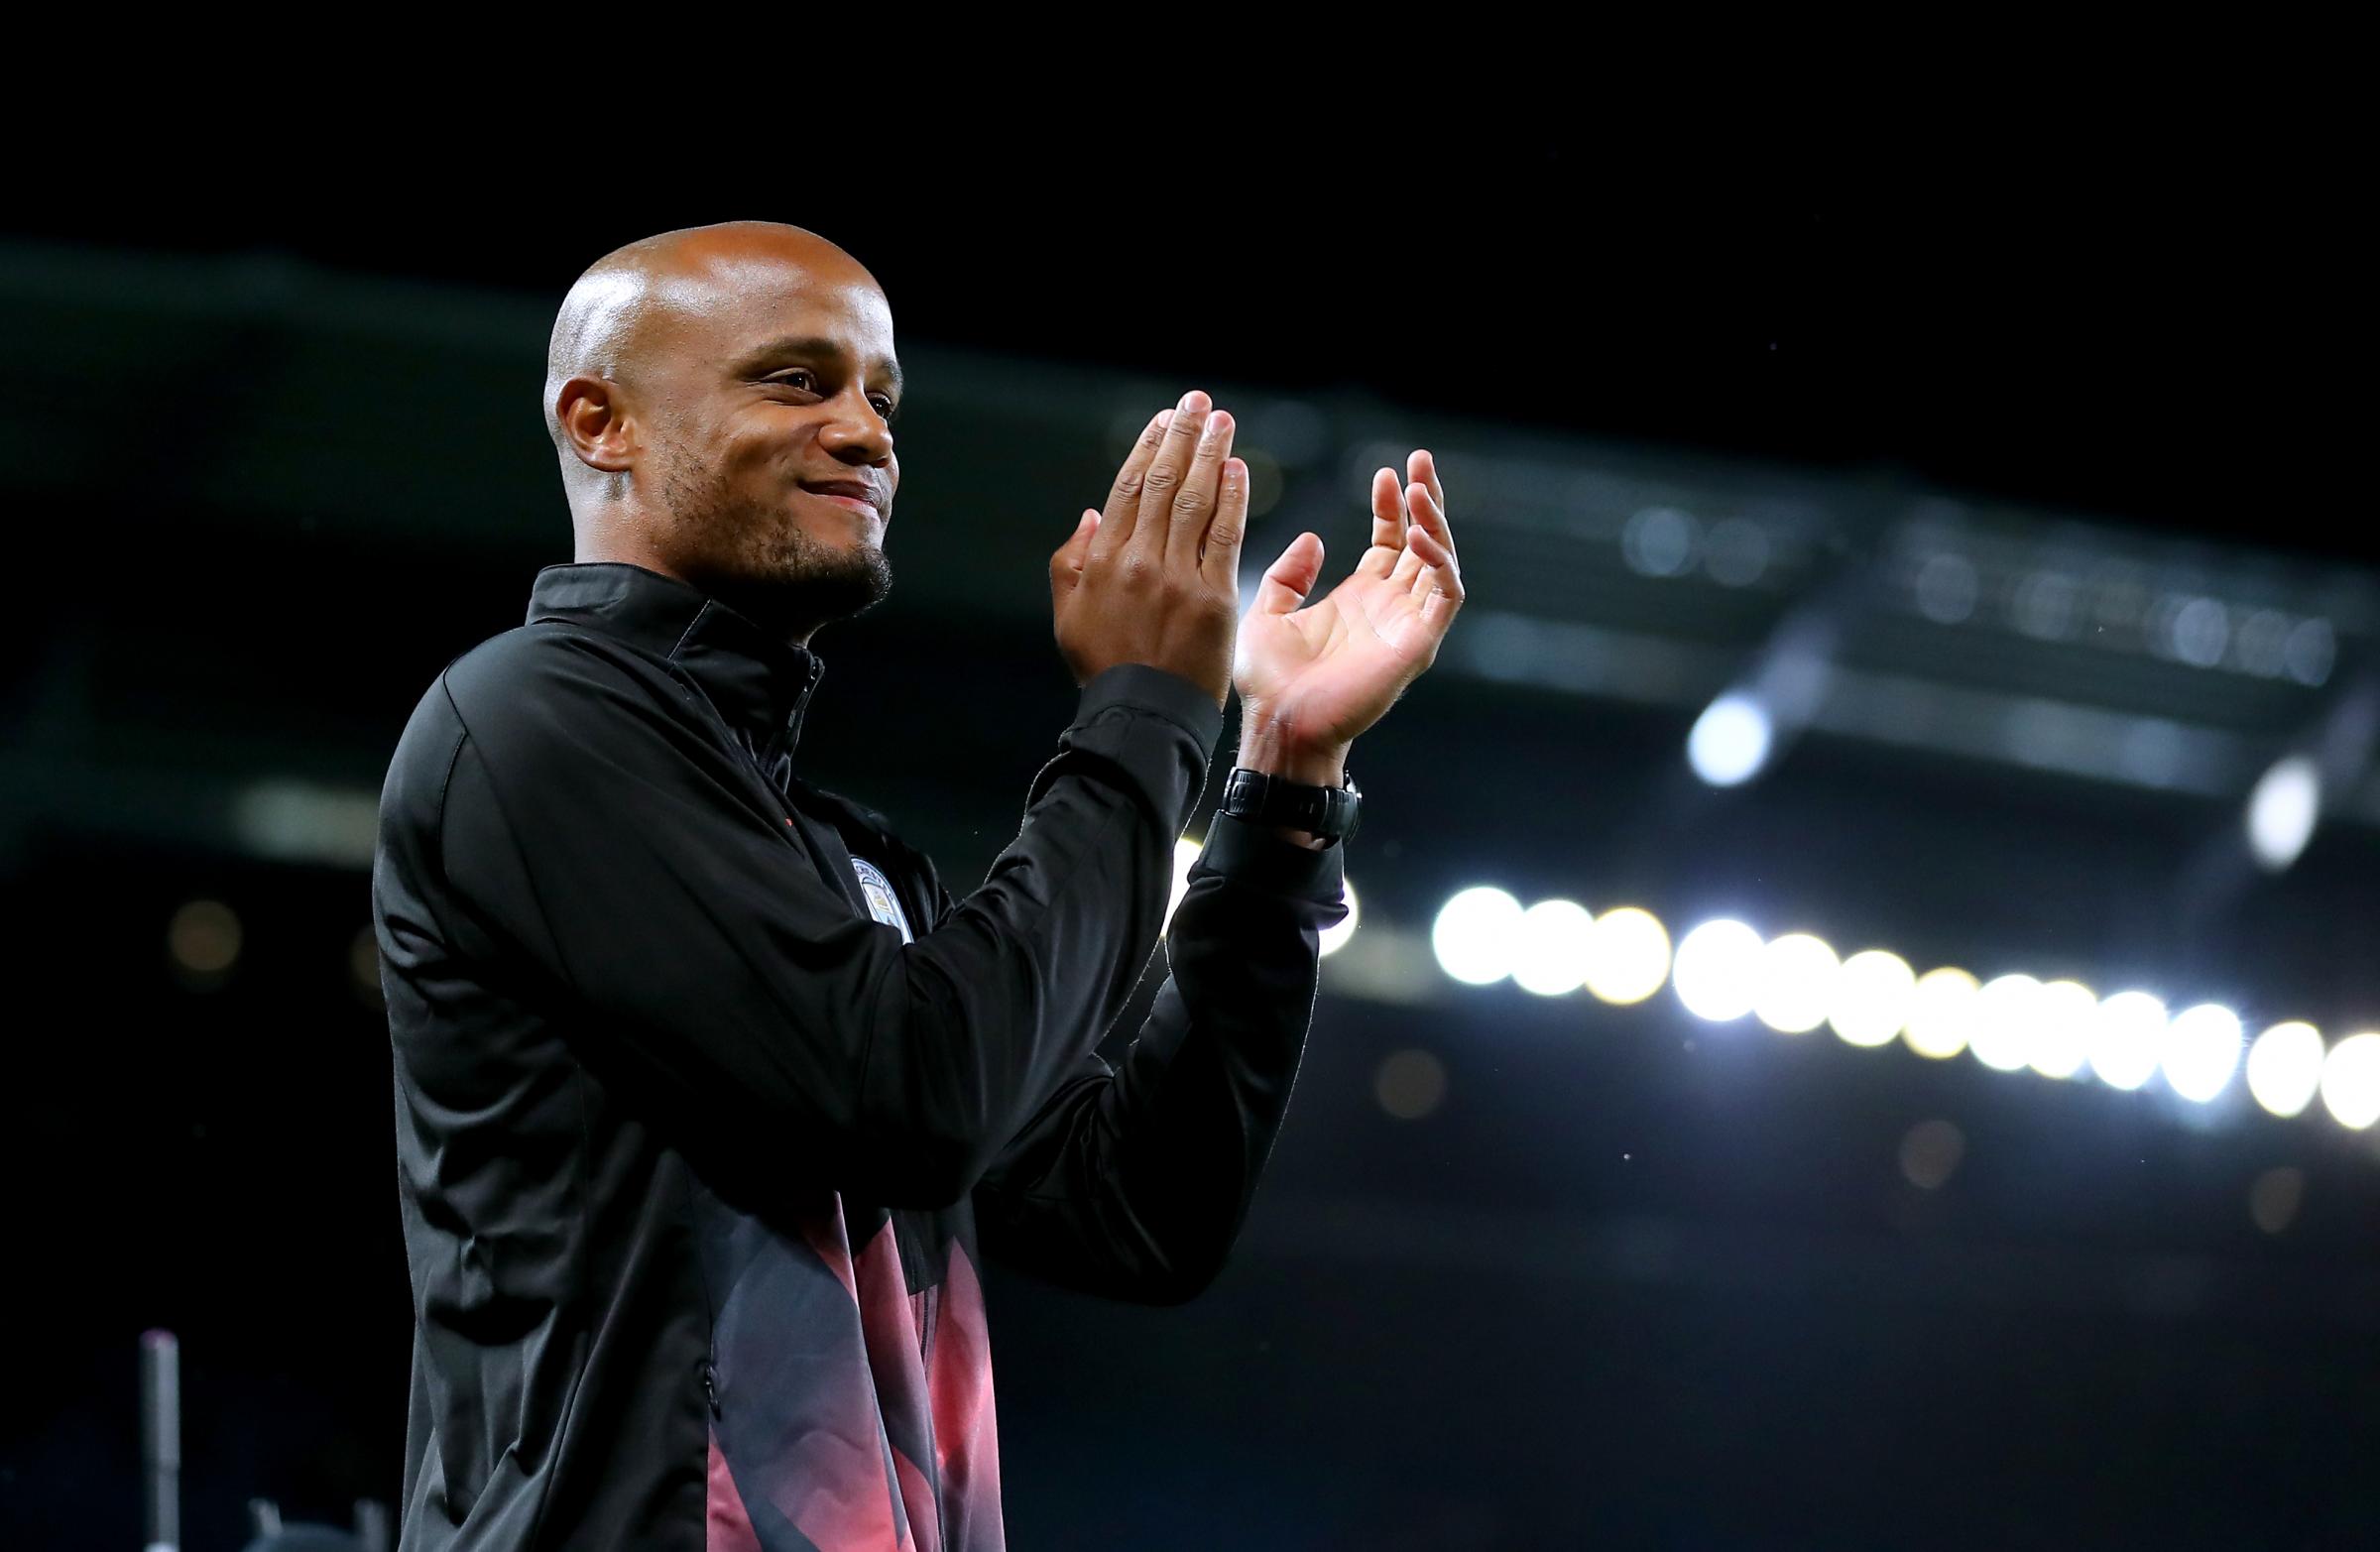 Man City legend Vincent Kompany's to-do list after taking charge at Burnley